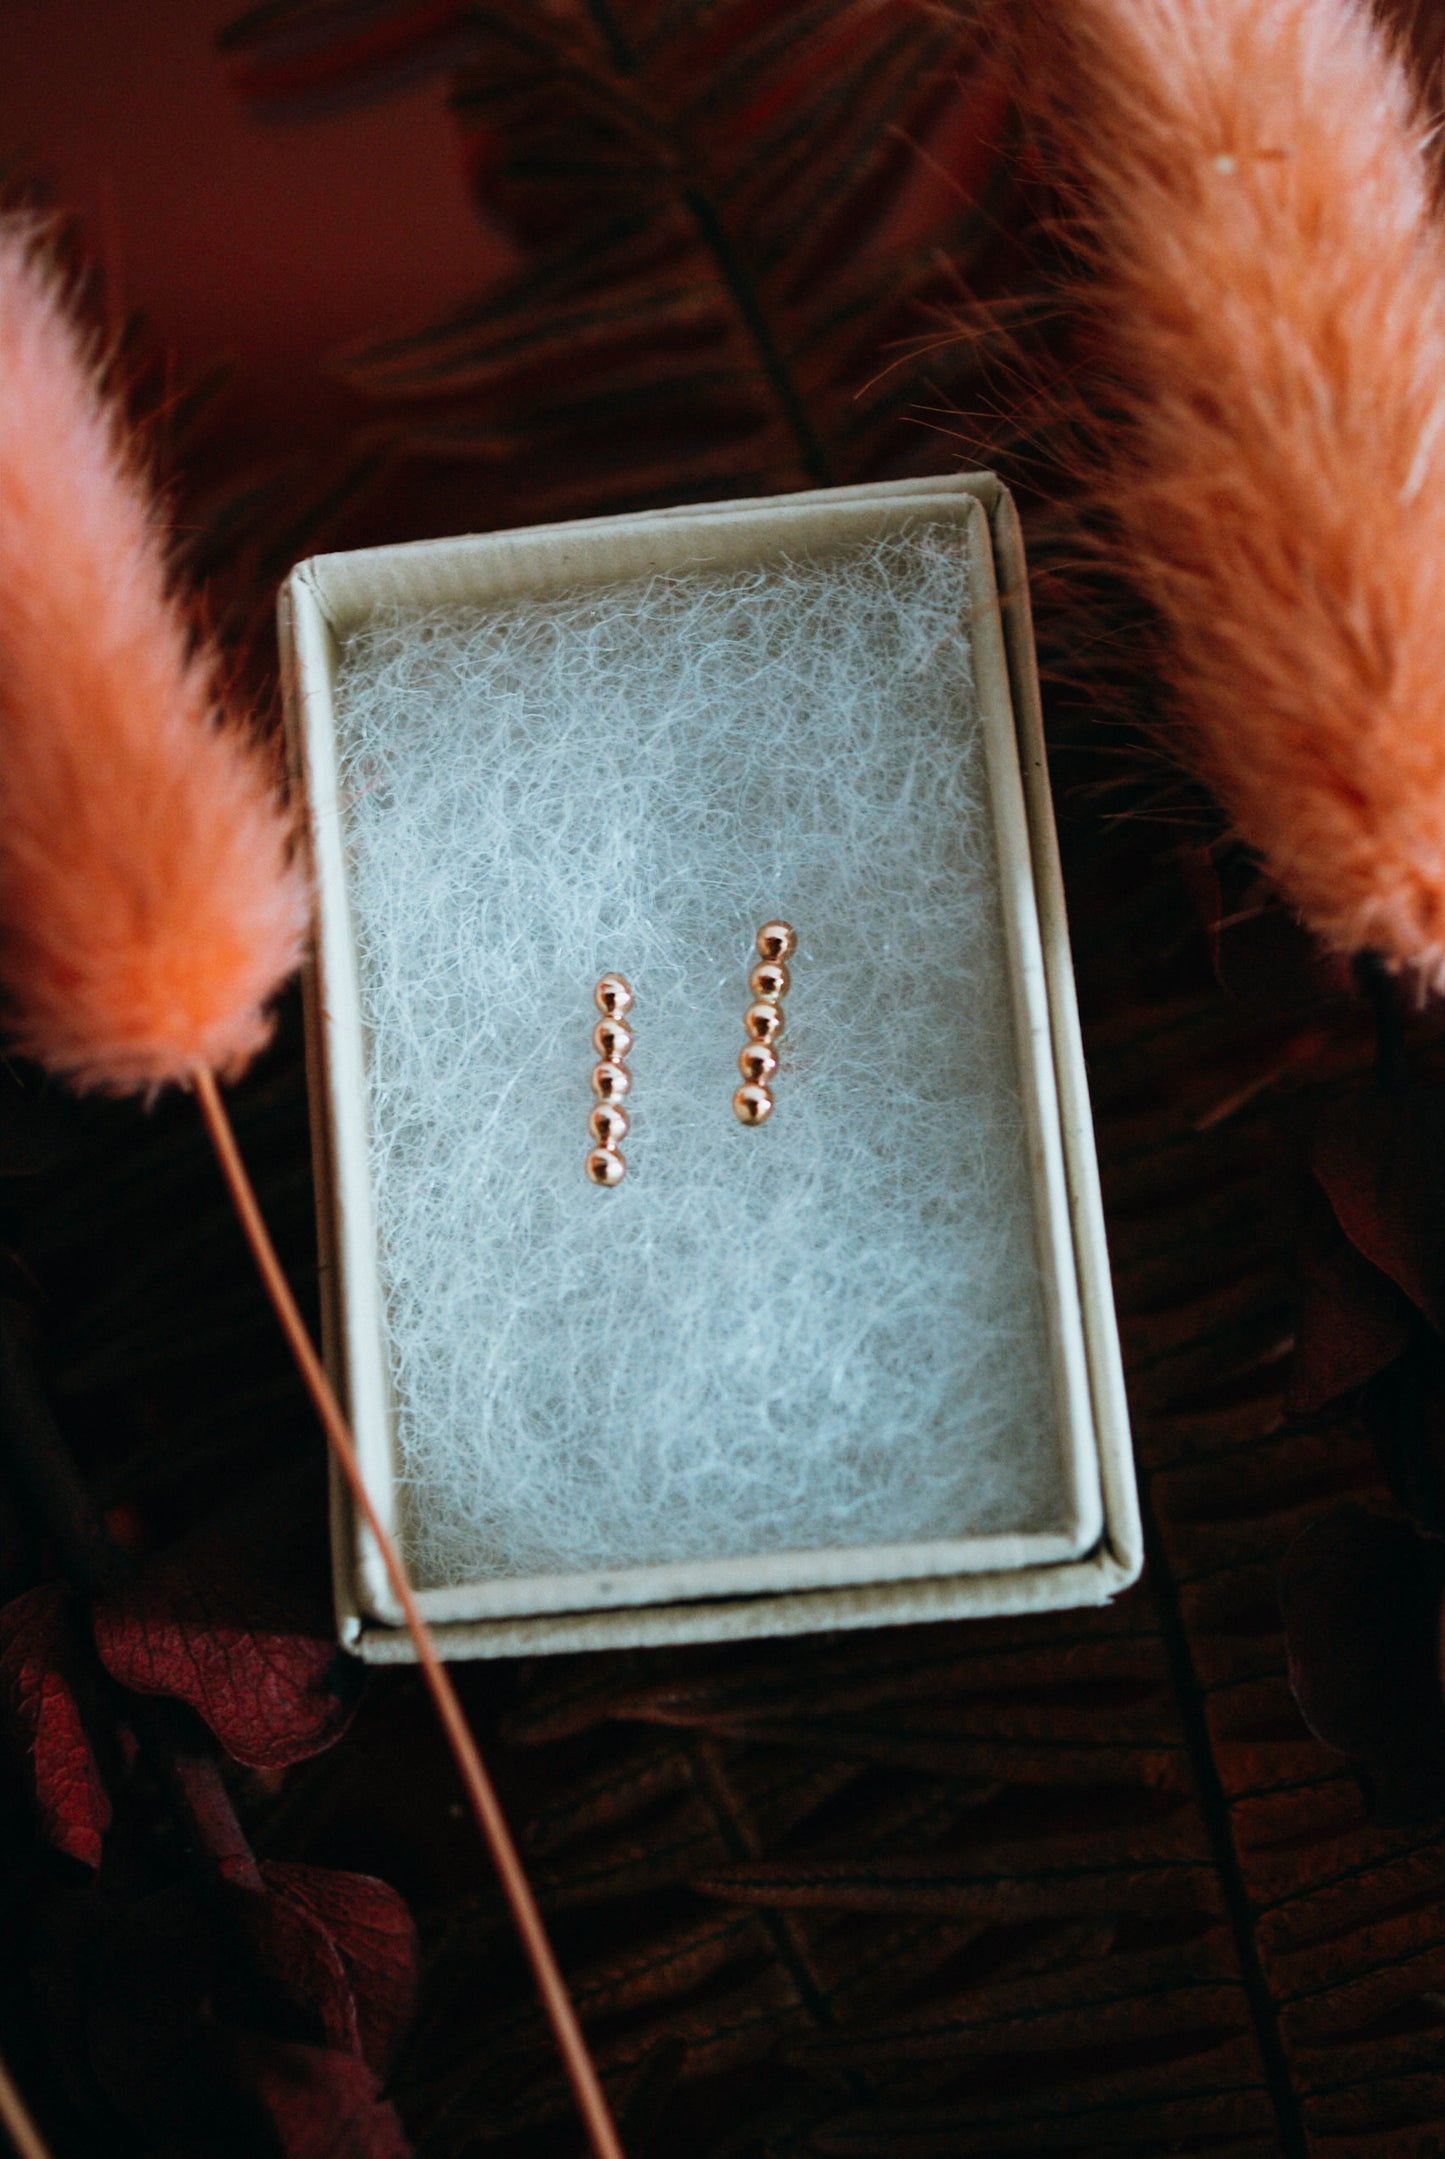 Mini Bead Bar Stud Earrings, Gold Fill, Rose Gold Fill, or Sterling Silver